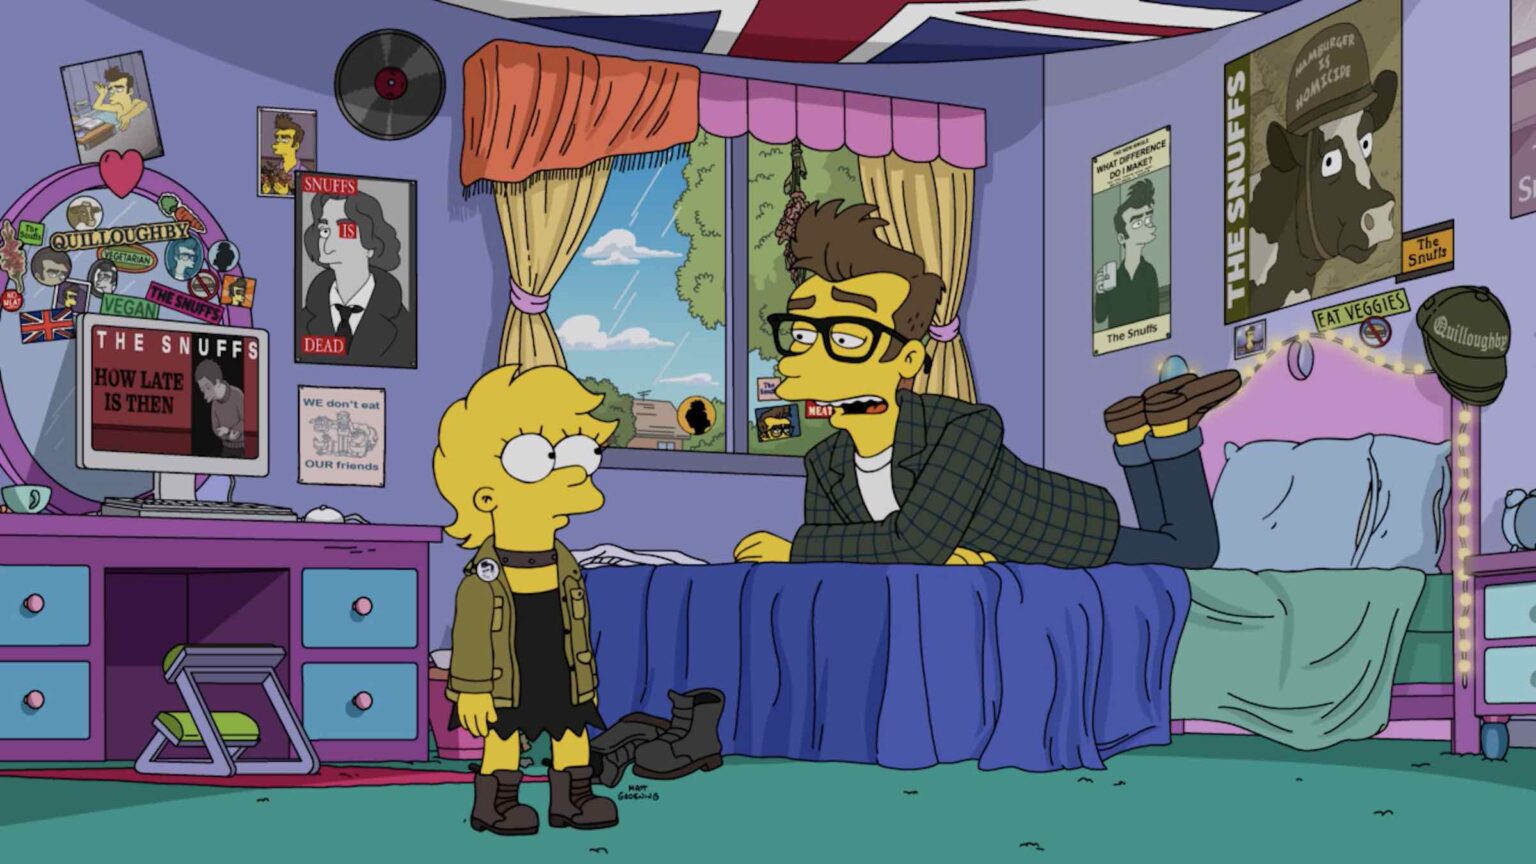 Need a good laugh and some rock n roll? Grab your guitars and everyone, young & old, come down to laugh at the reactions to Morrissey on ‘The Simpsons’.